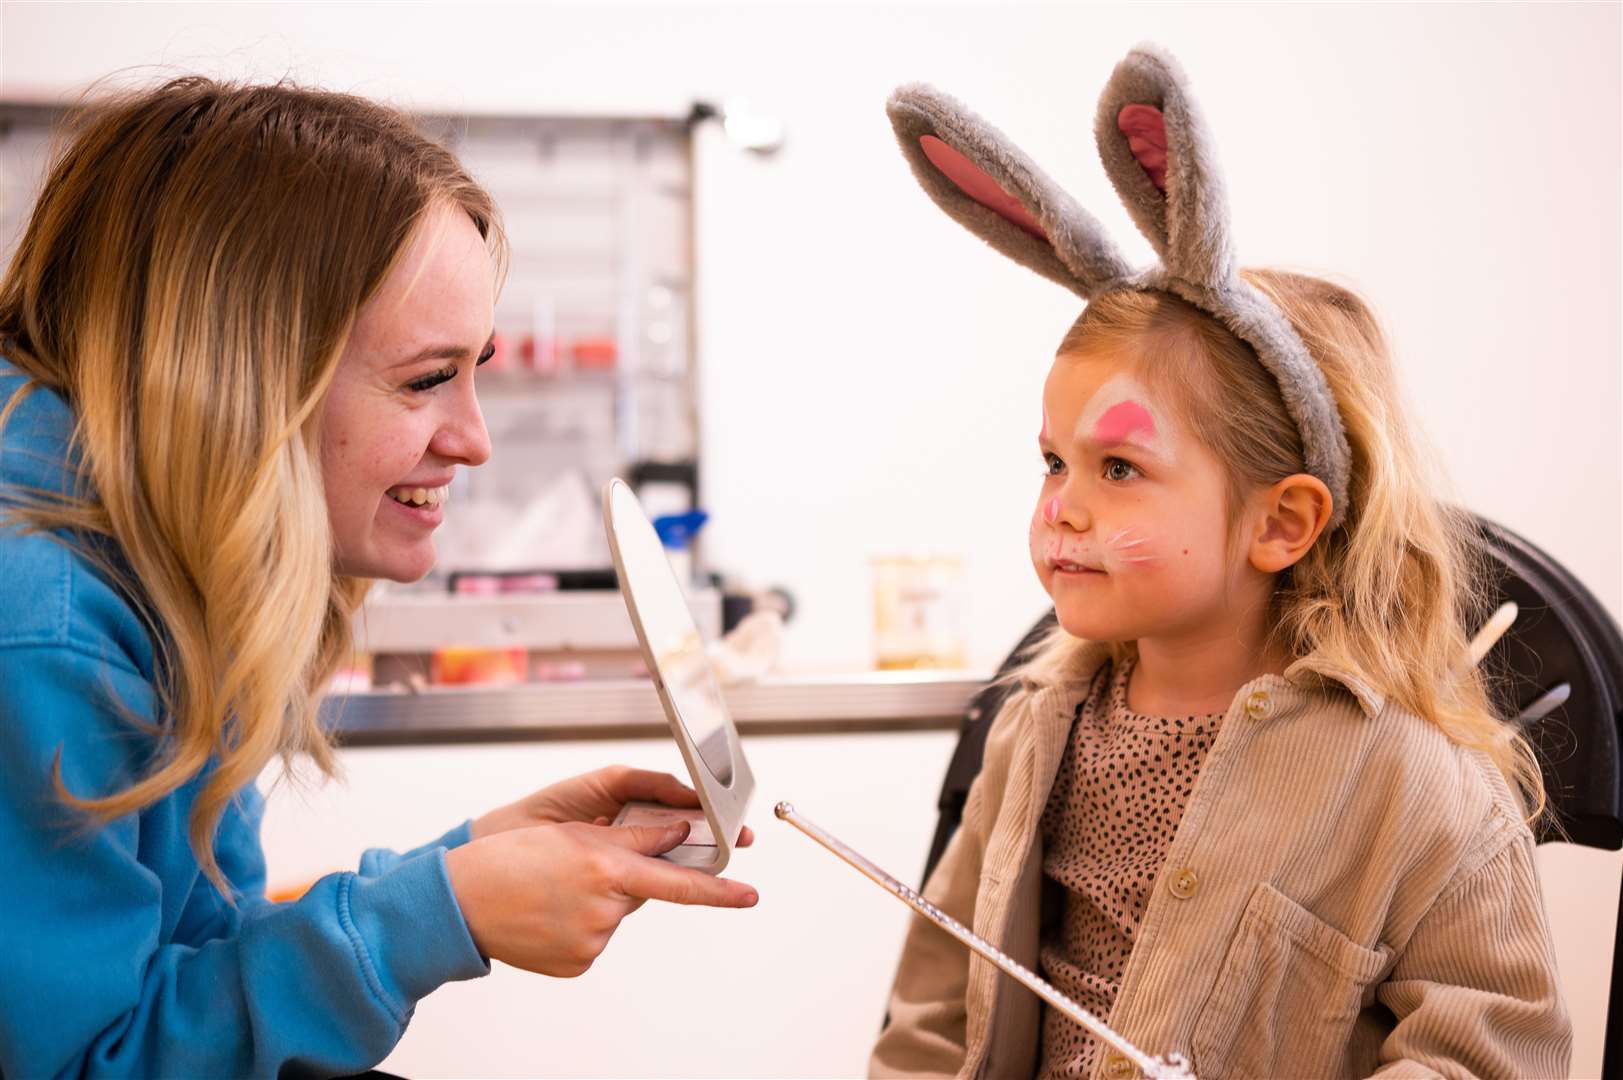 Face painting was available for the children